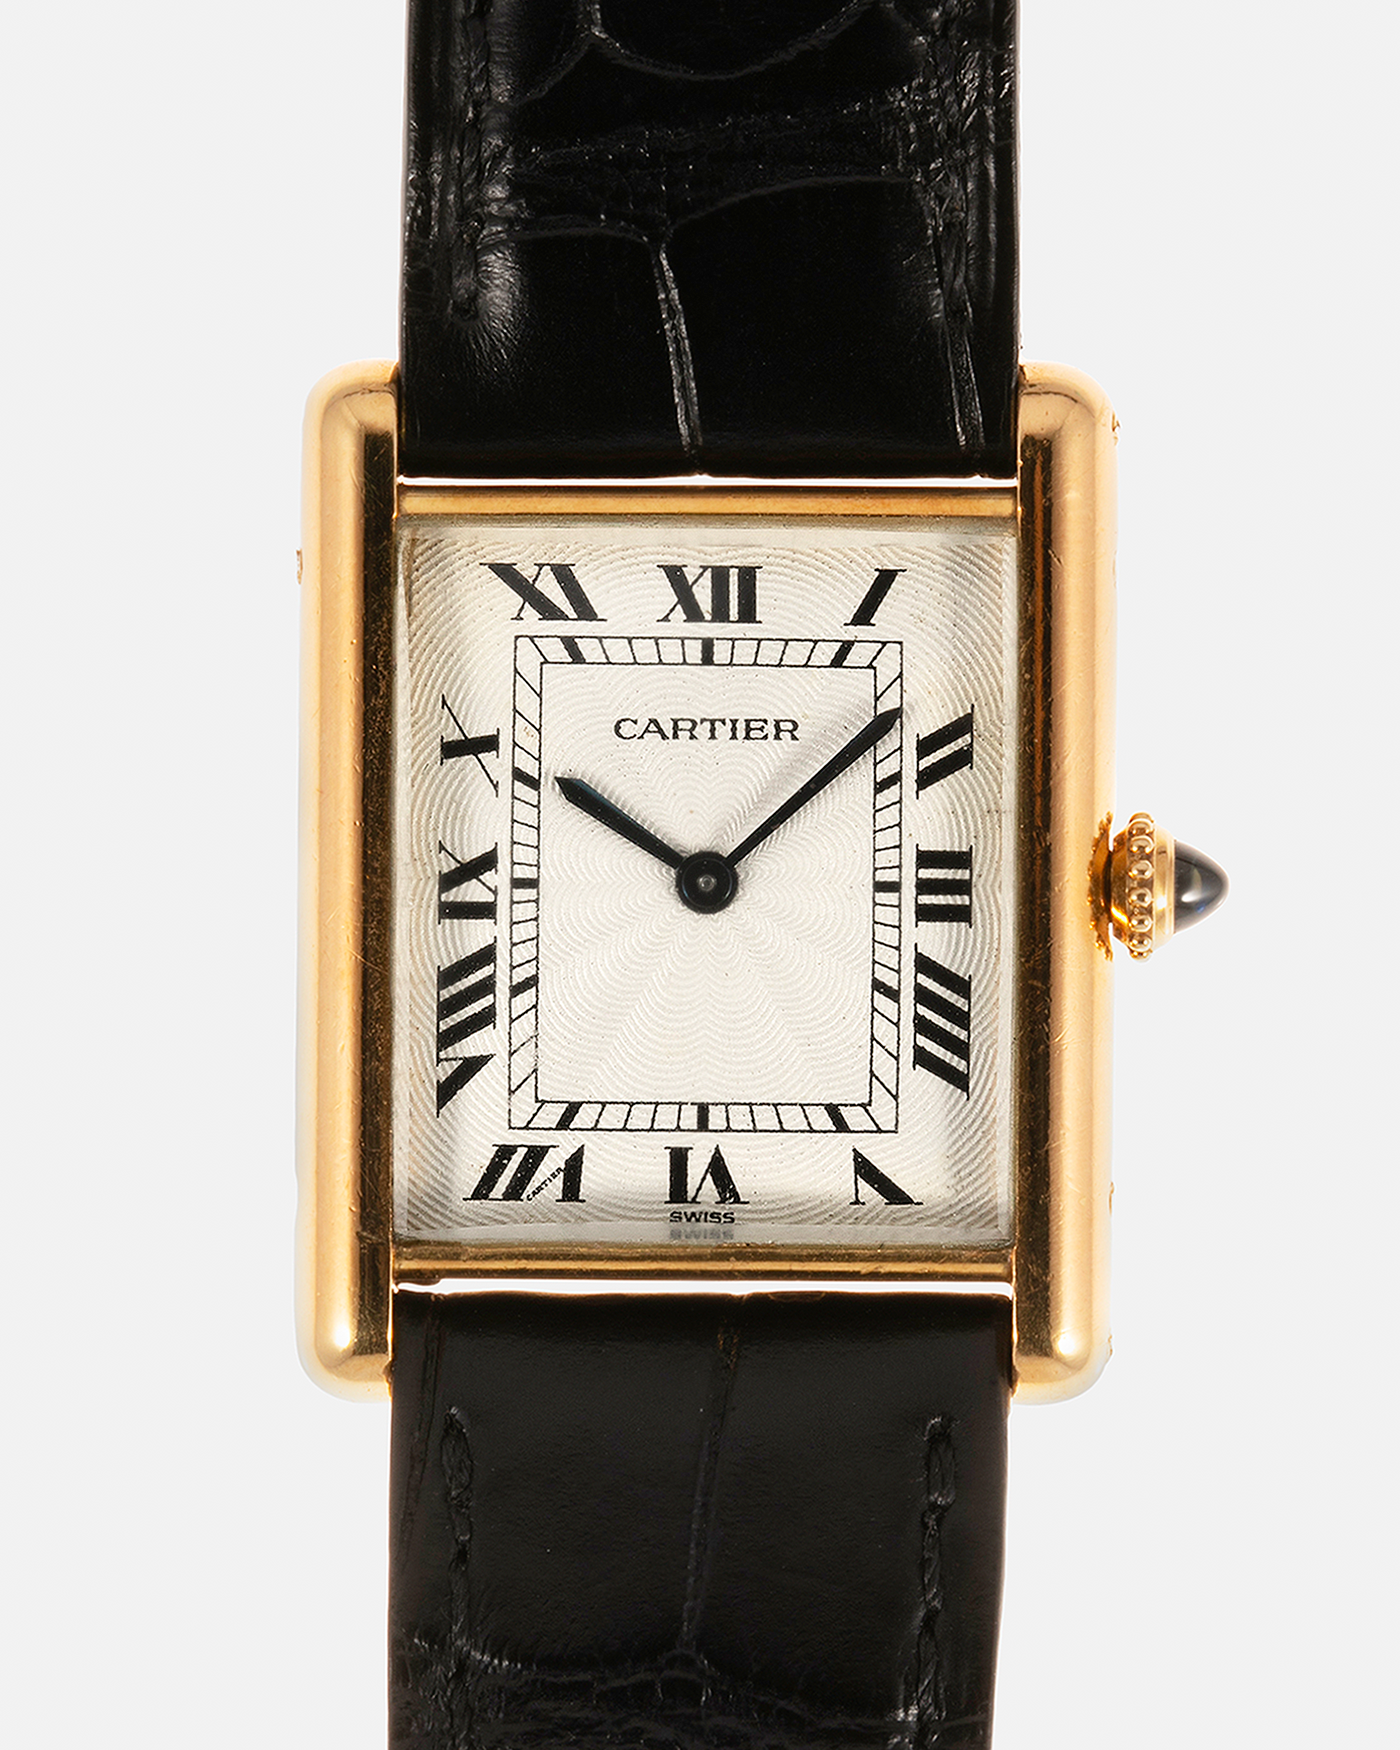 Brand: Cartier Year: 1980s Model: Tank Louis Cartier Reference Number: 96065 Material: 18-carat Yellow Gold Movement: Cartier Cal. 96 (Based on Piaget Cal. 21), Manual-Winding Case Diameter: 23mm x 30mm9 Lug Width: 17mm Strap: Cartier Alligator Leather Strap with Signed 18-carat Yellow Gold Tang Buckle